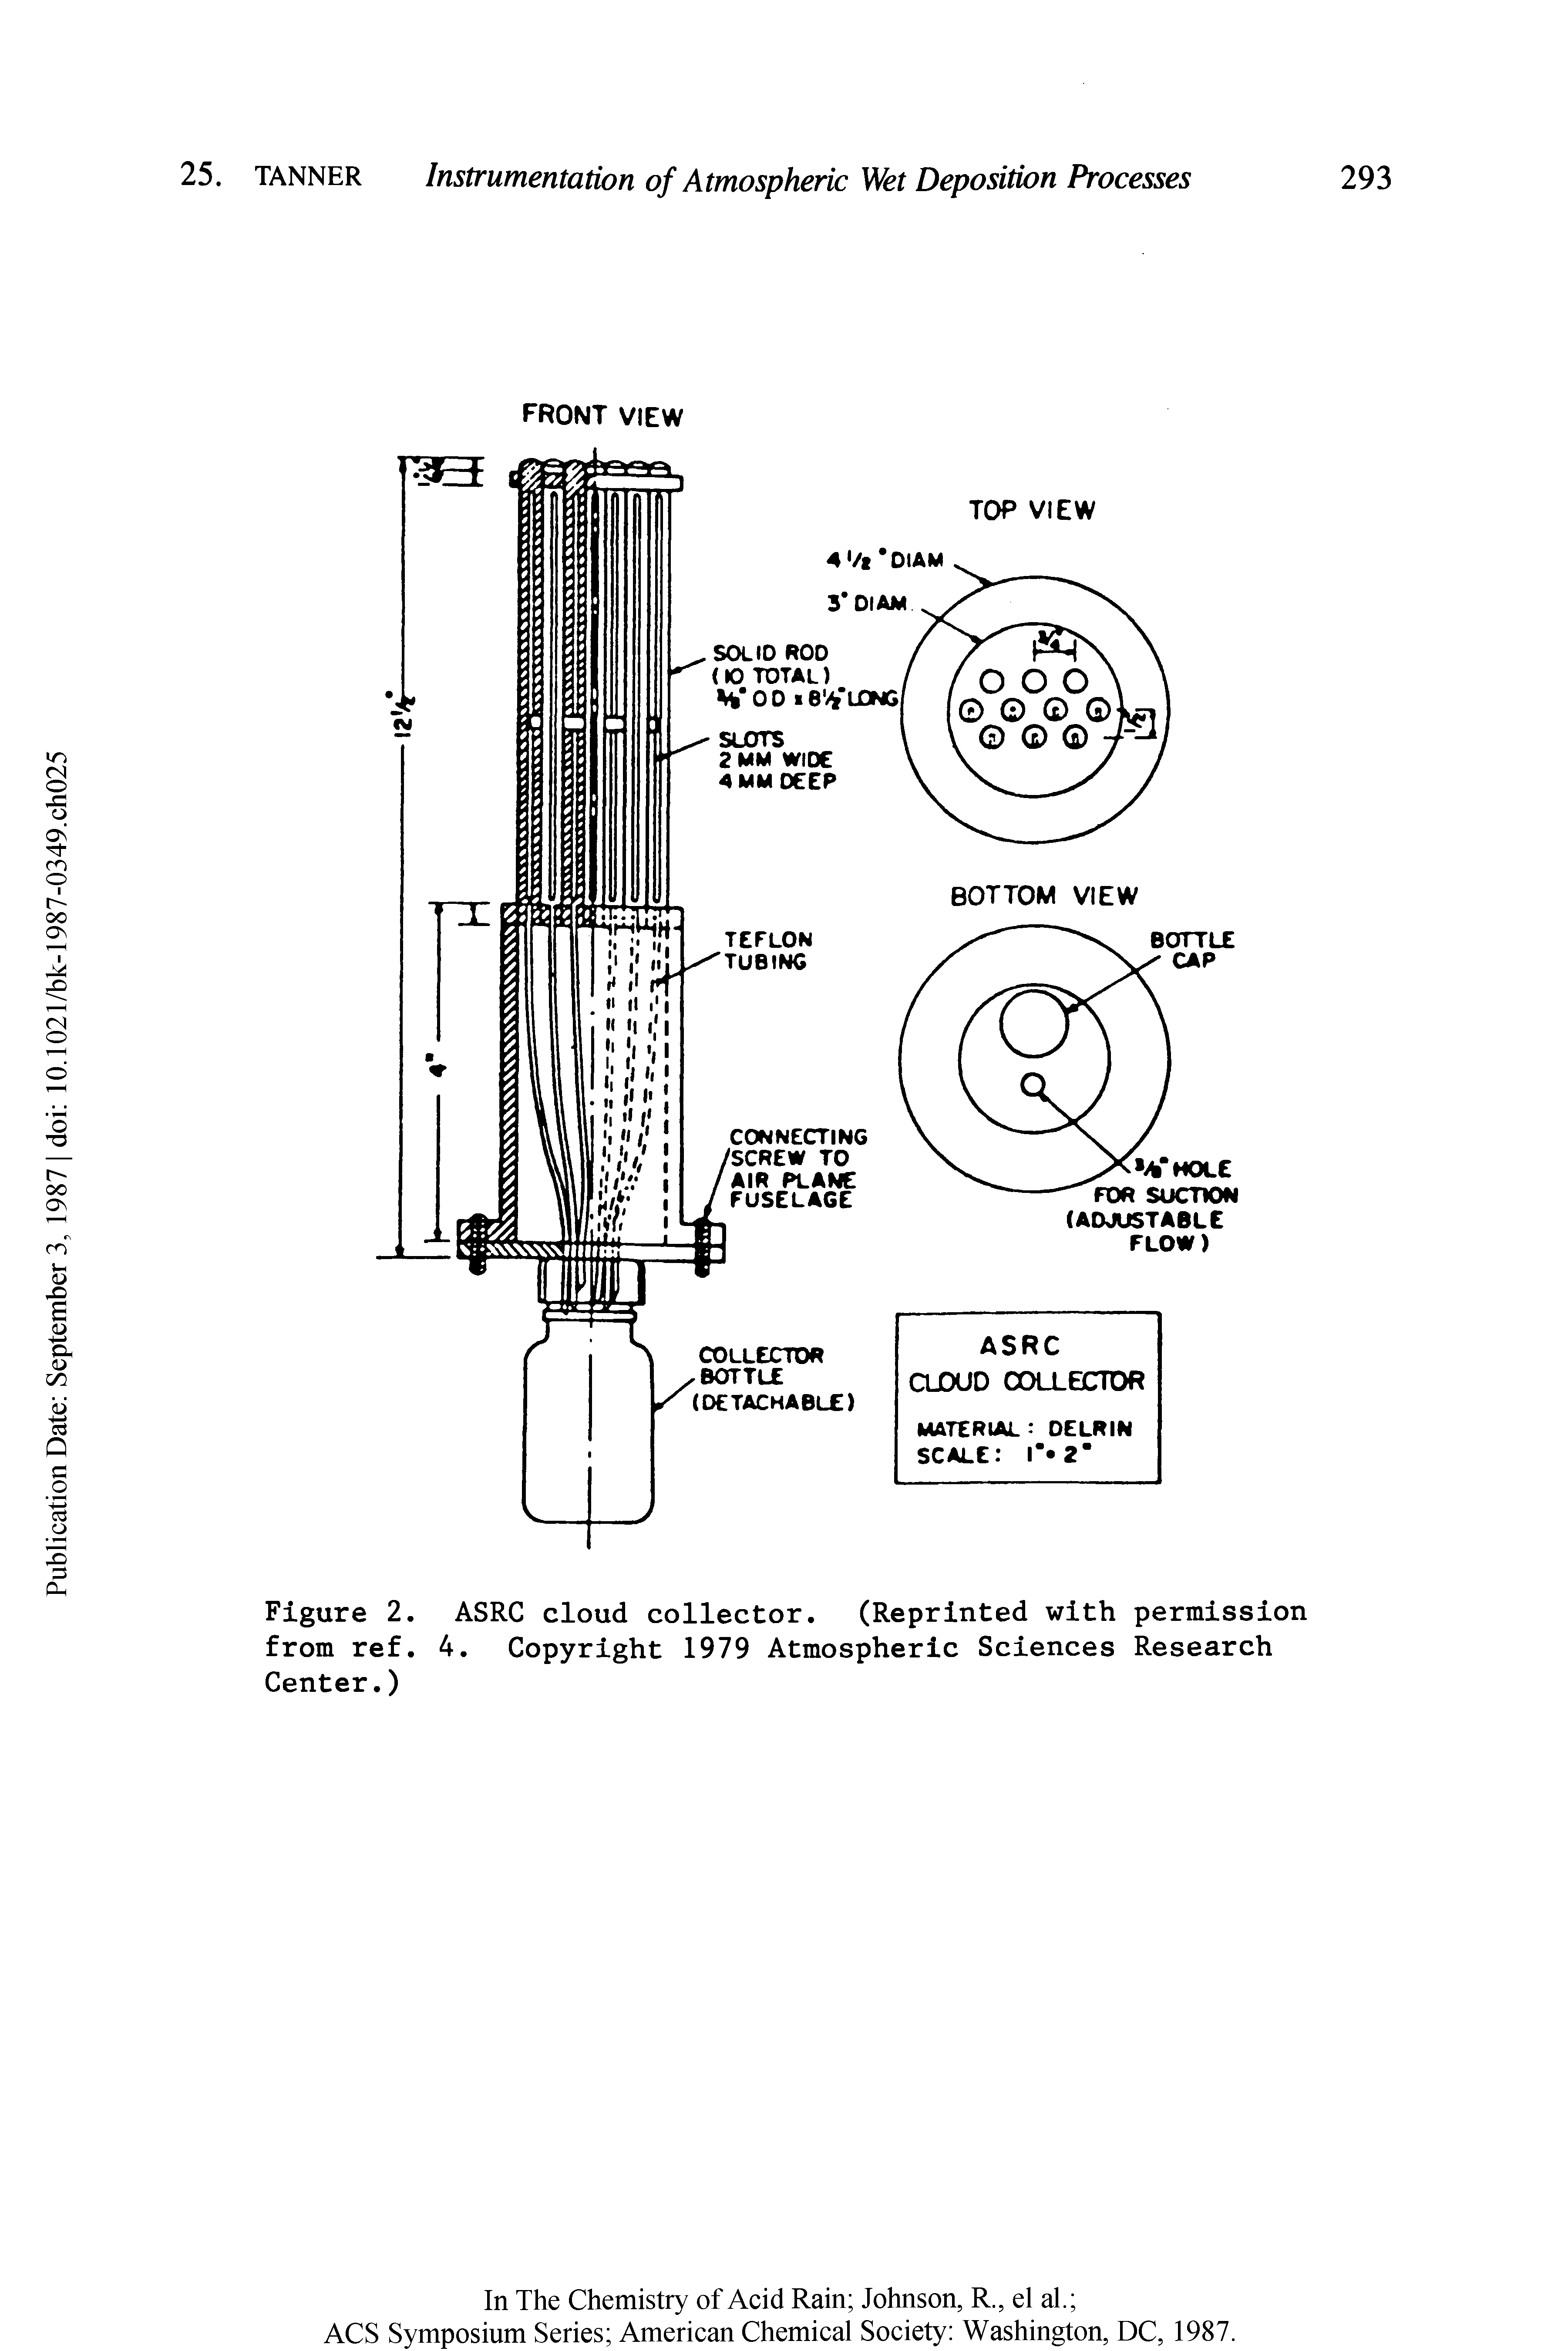 Figure 2. ASRC cloud collector. (Reprinted with permission from ref. 4. Copyright 1979 Atmospheric Sciences Research Center.)...